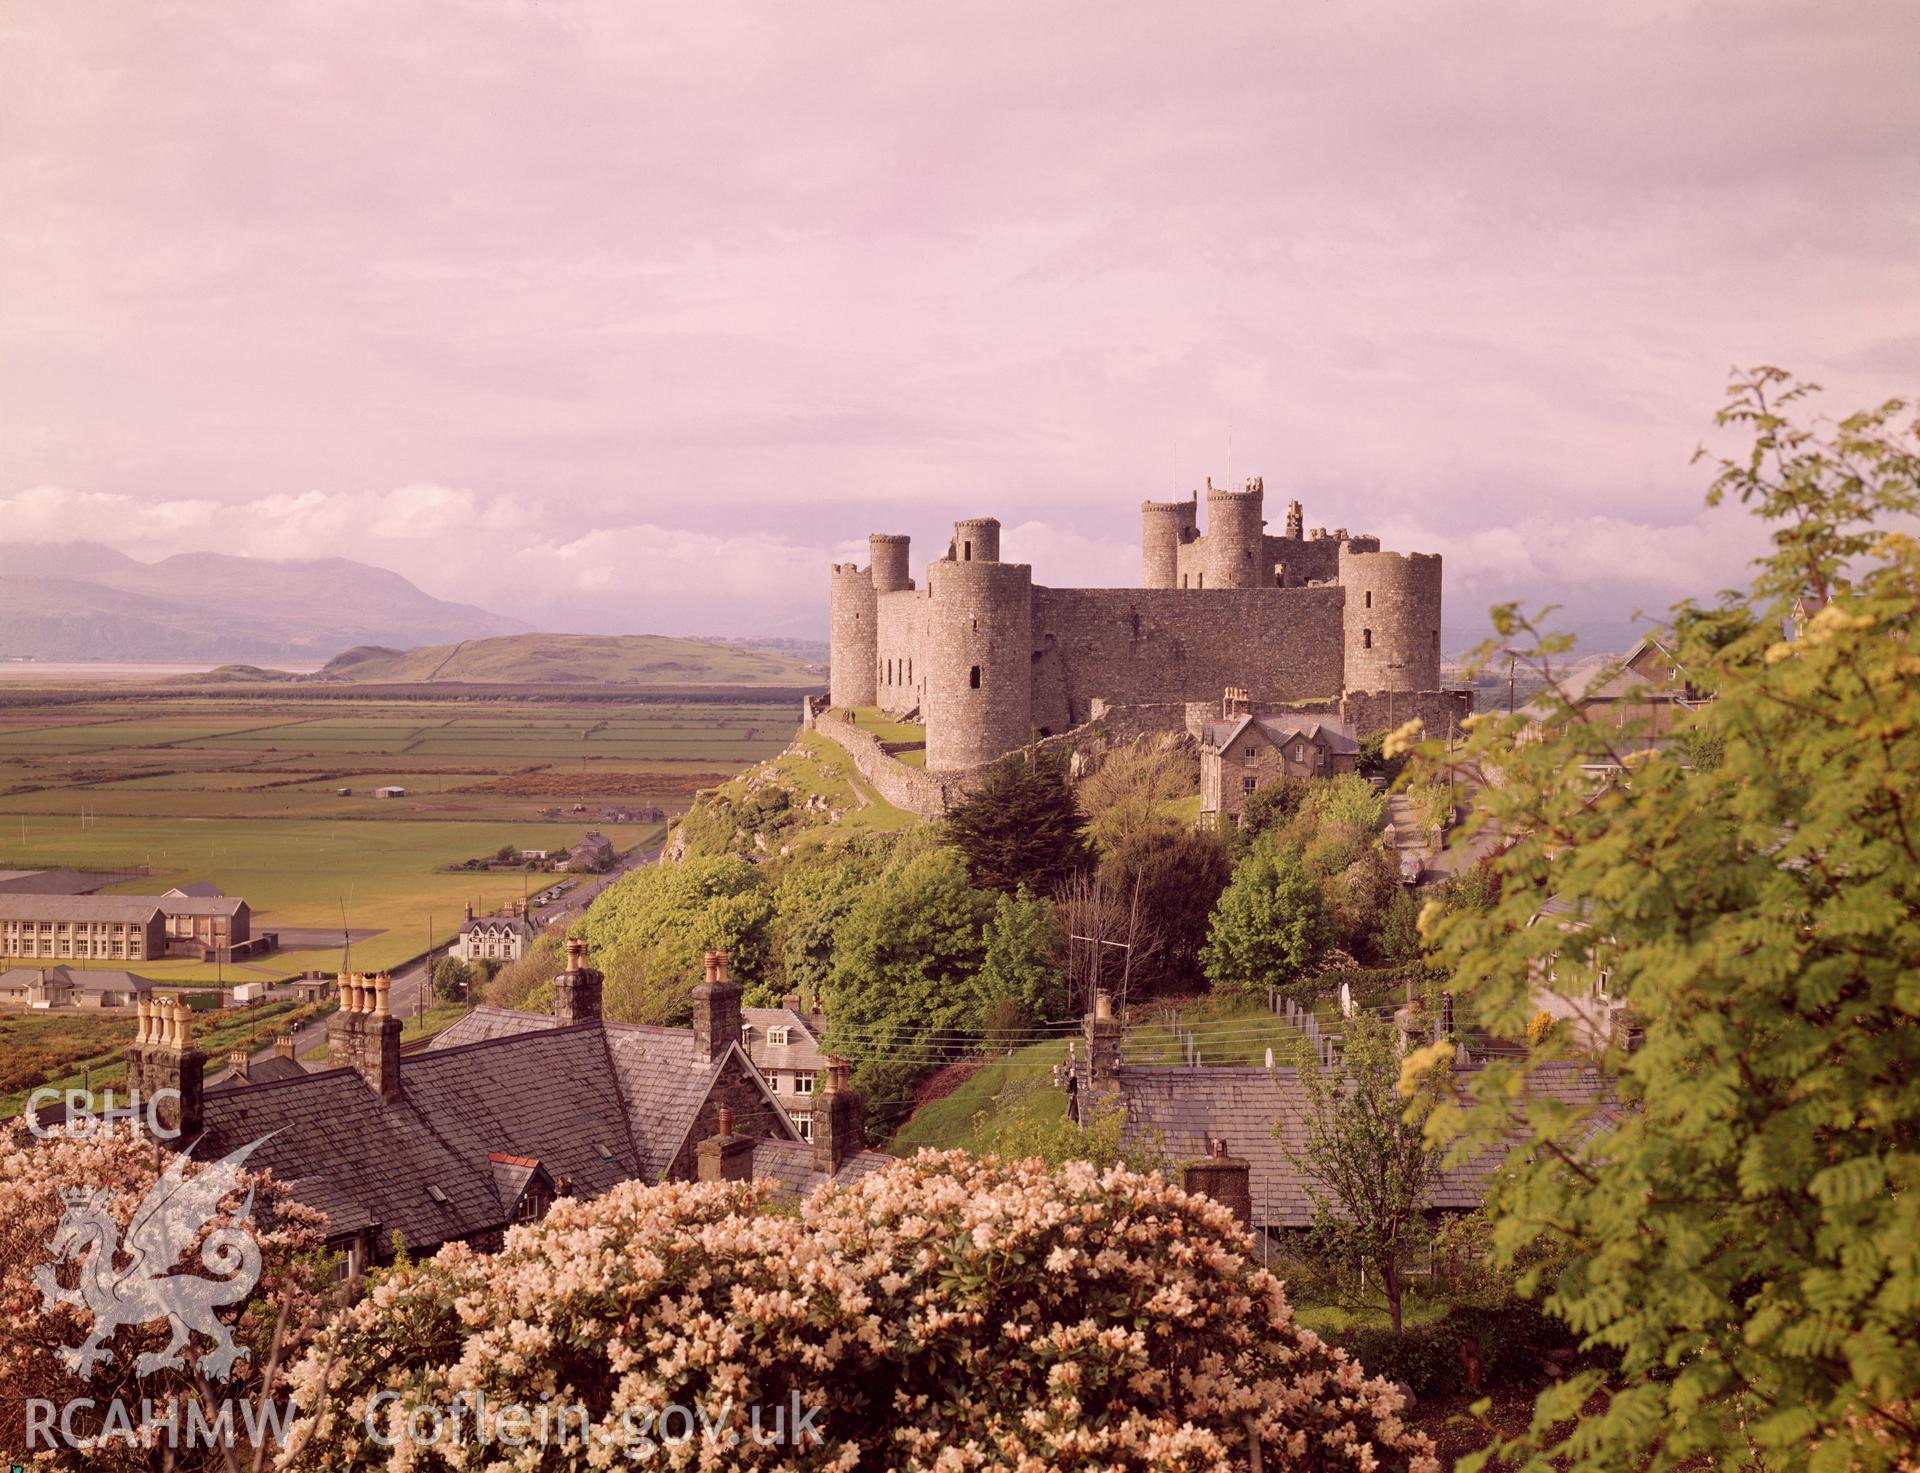 1 colour transparency showing view of Harlech castle, undated; collated by the former Central Office of Information.